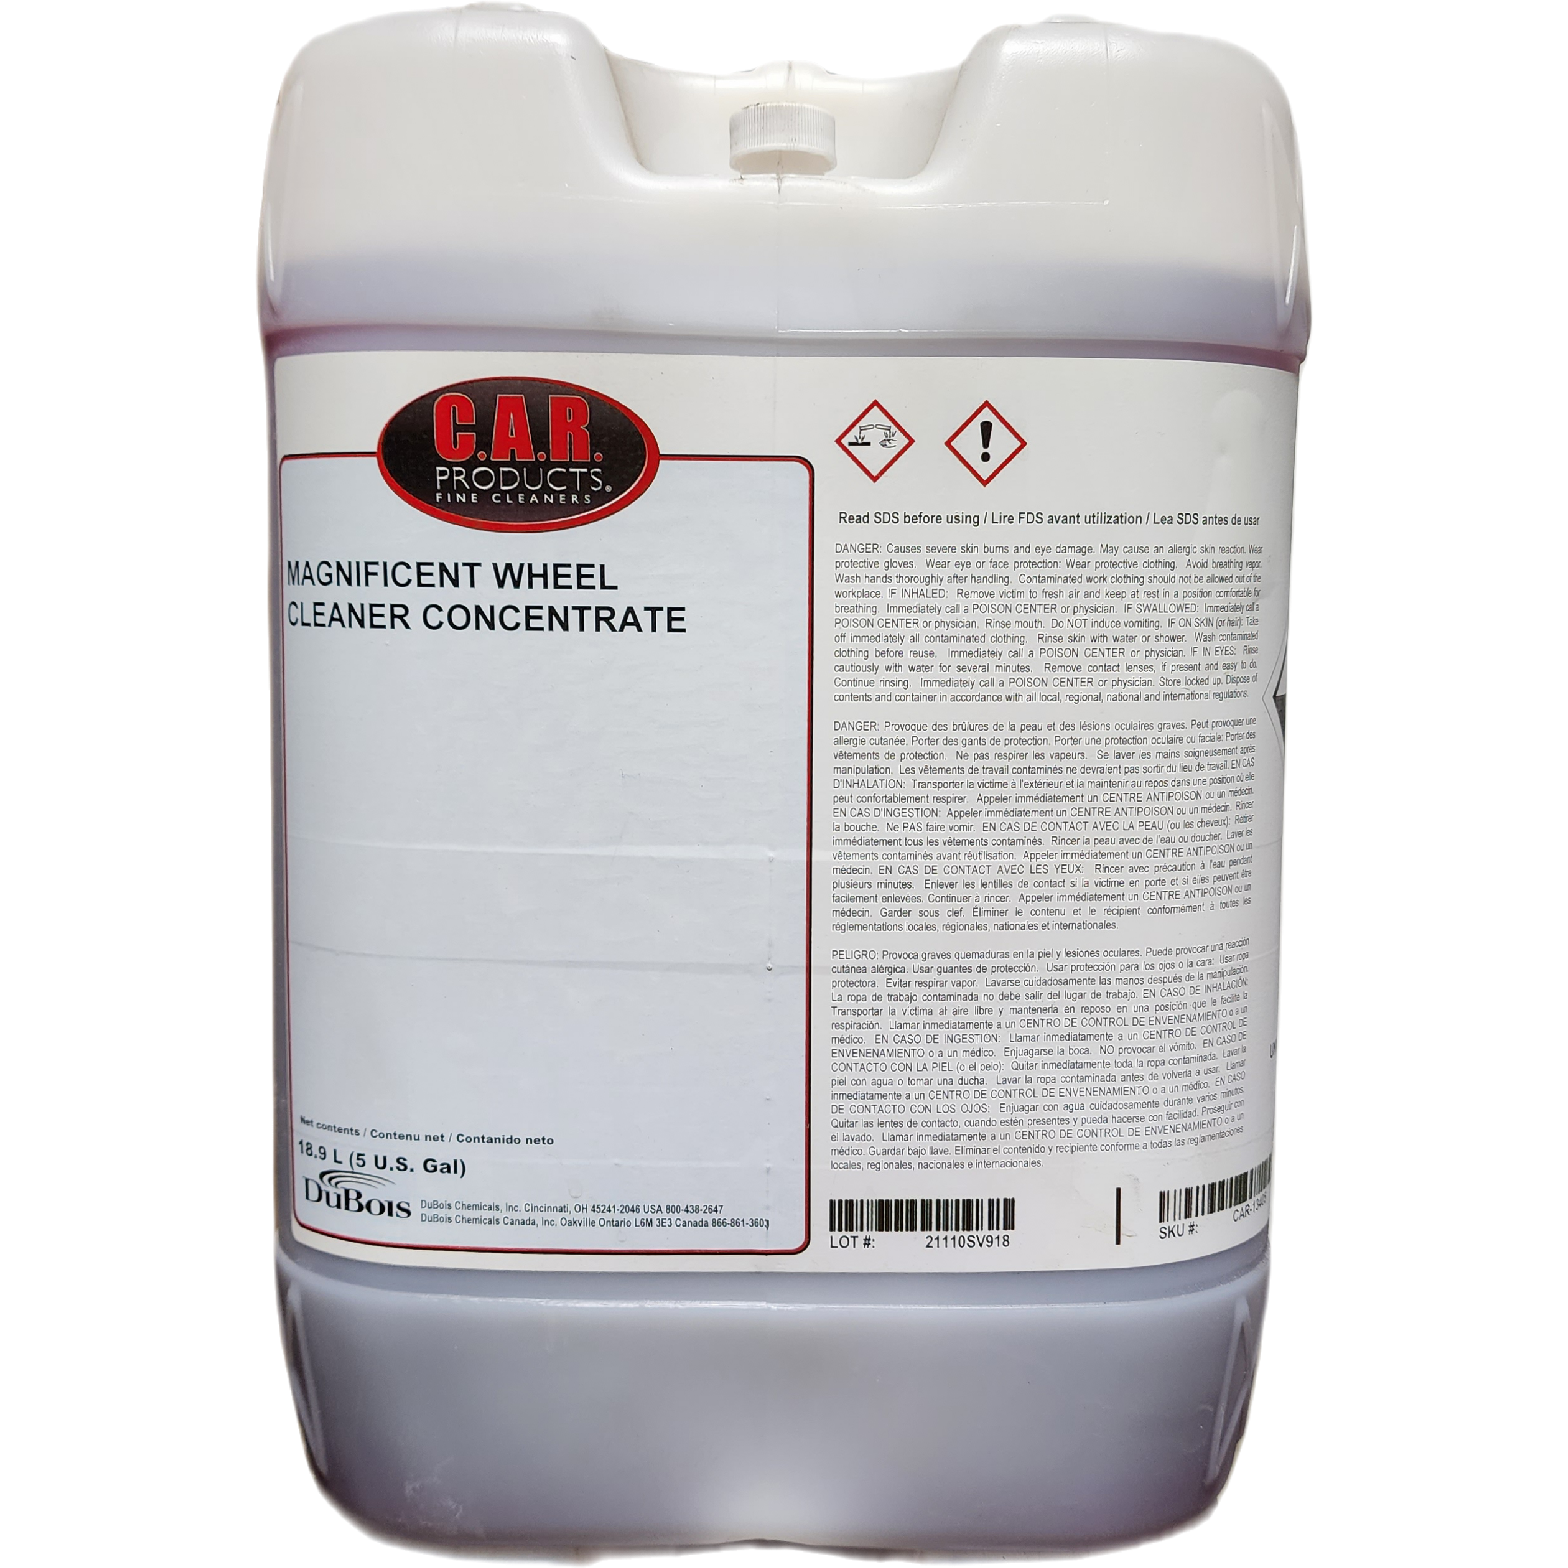 XCP CAR-13405 CAR Products Magnificent Wheel Cleaner Concentrate (5 gal)